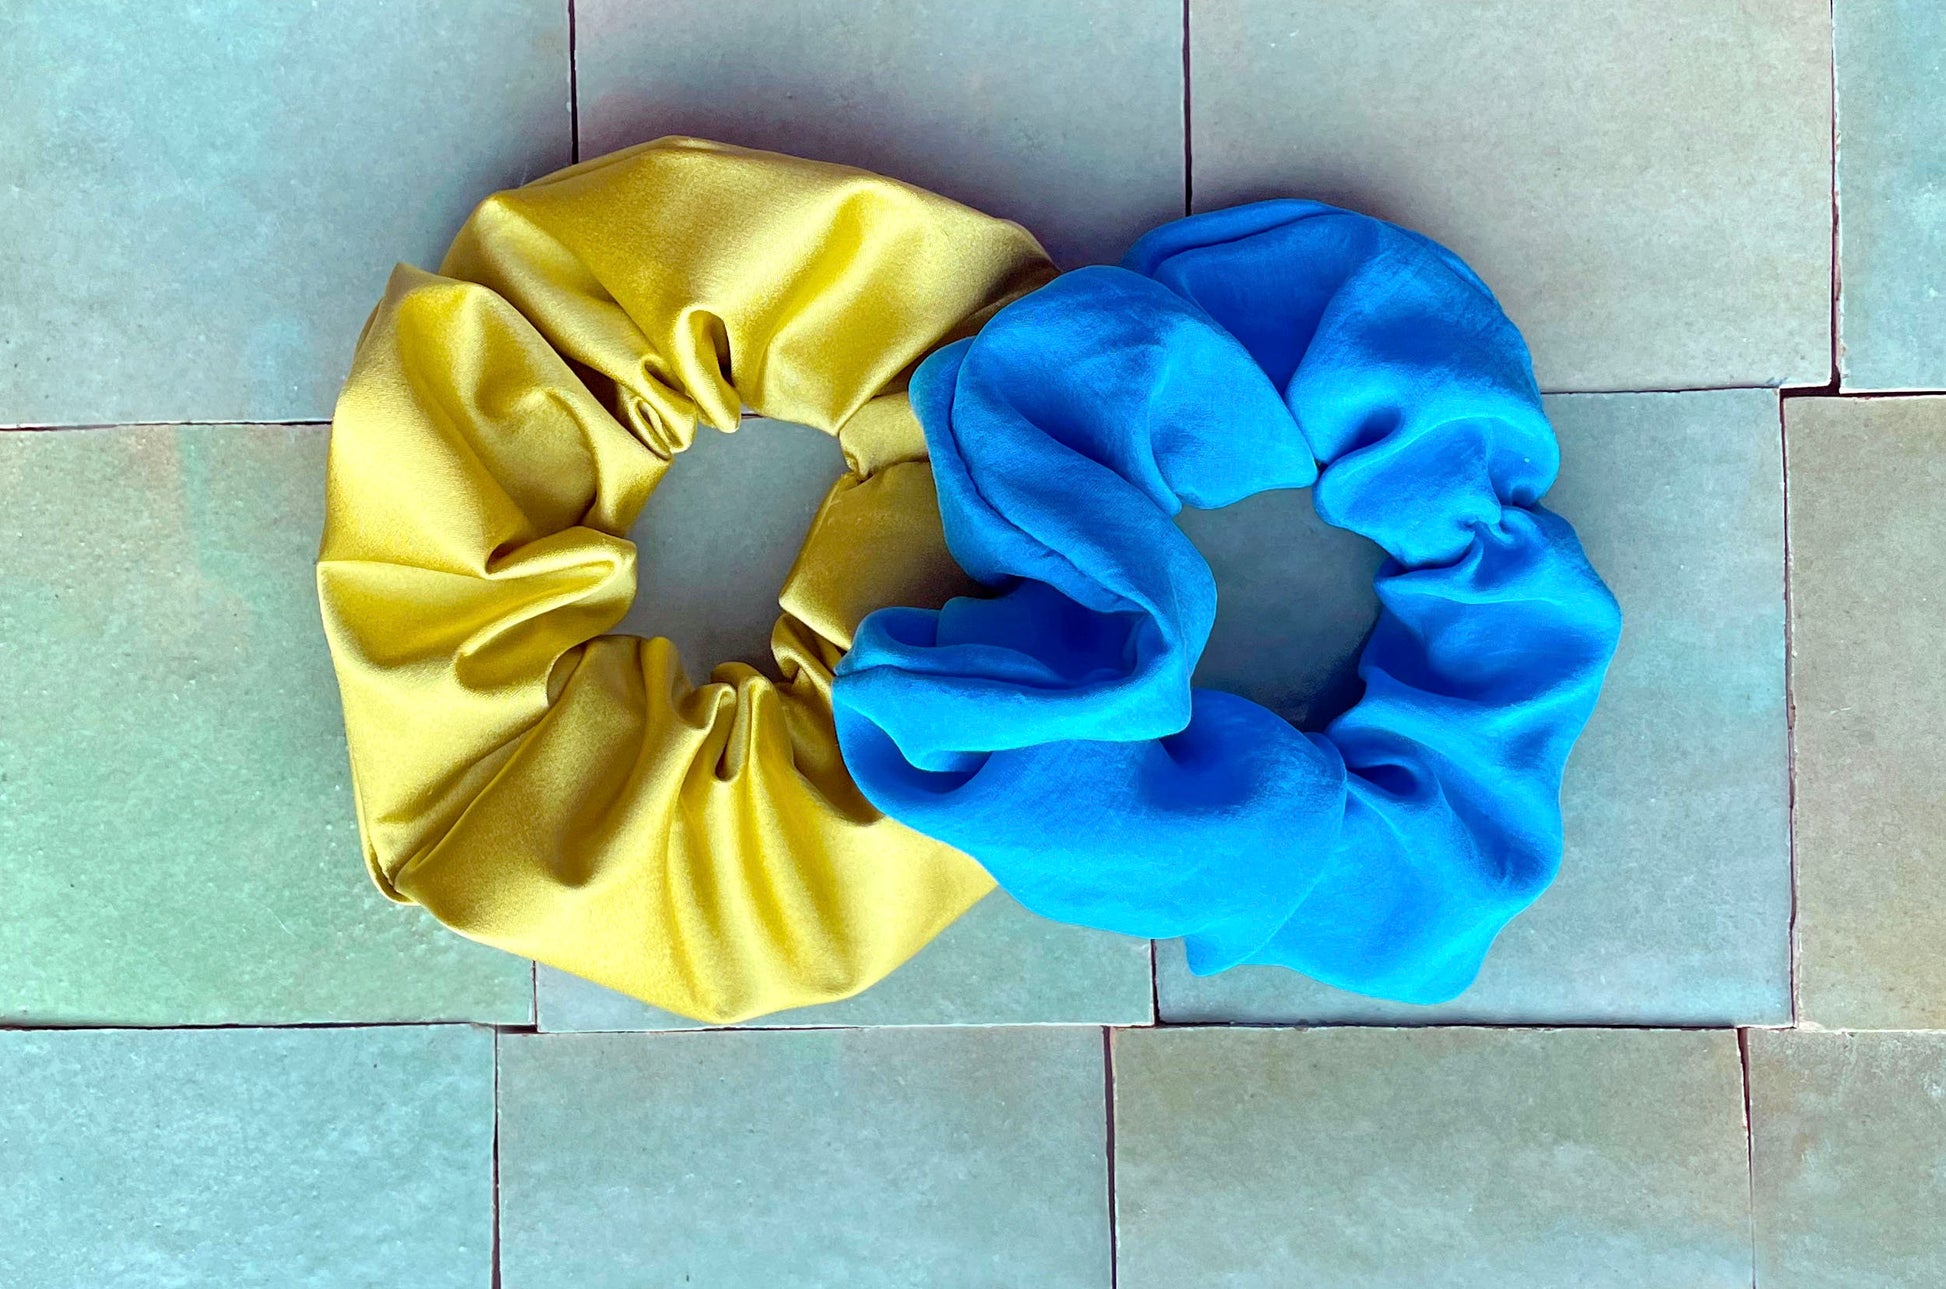 Set of Two! ReClaimed Silk Scrunchies